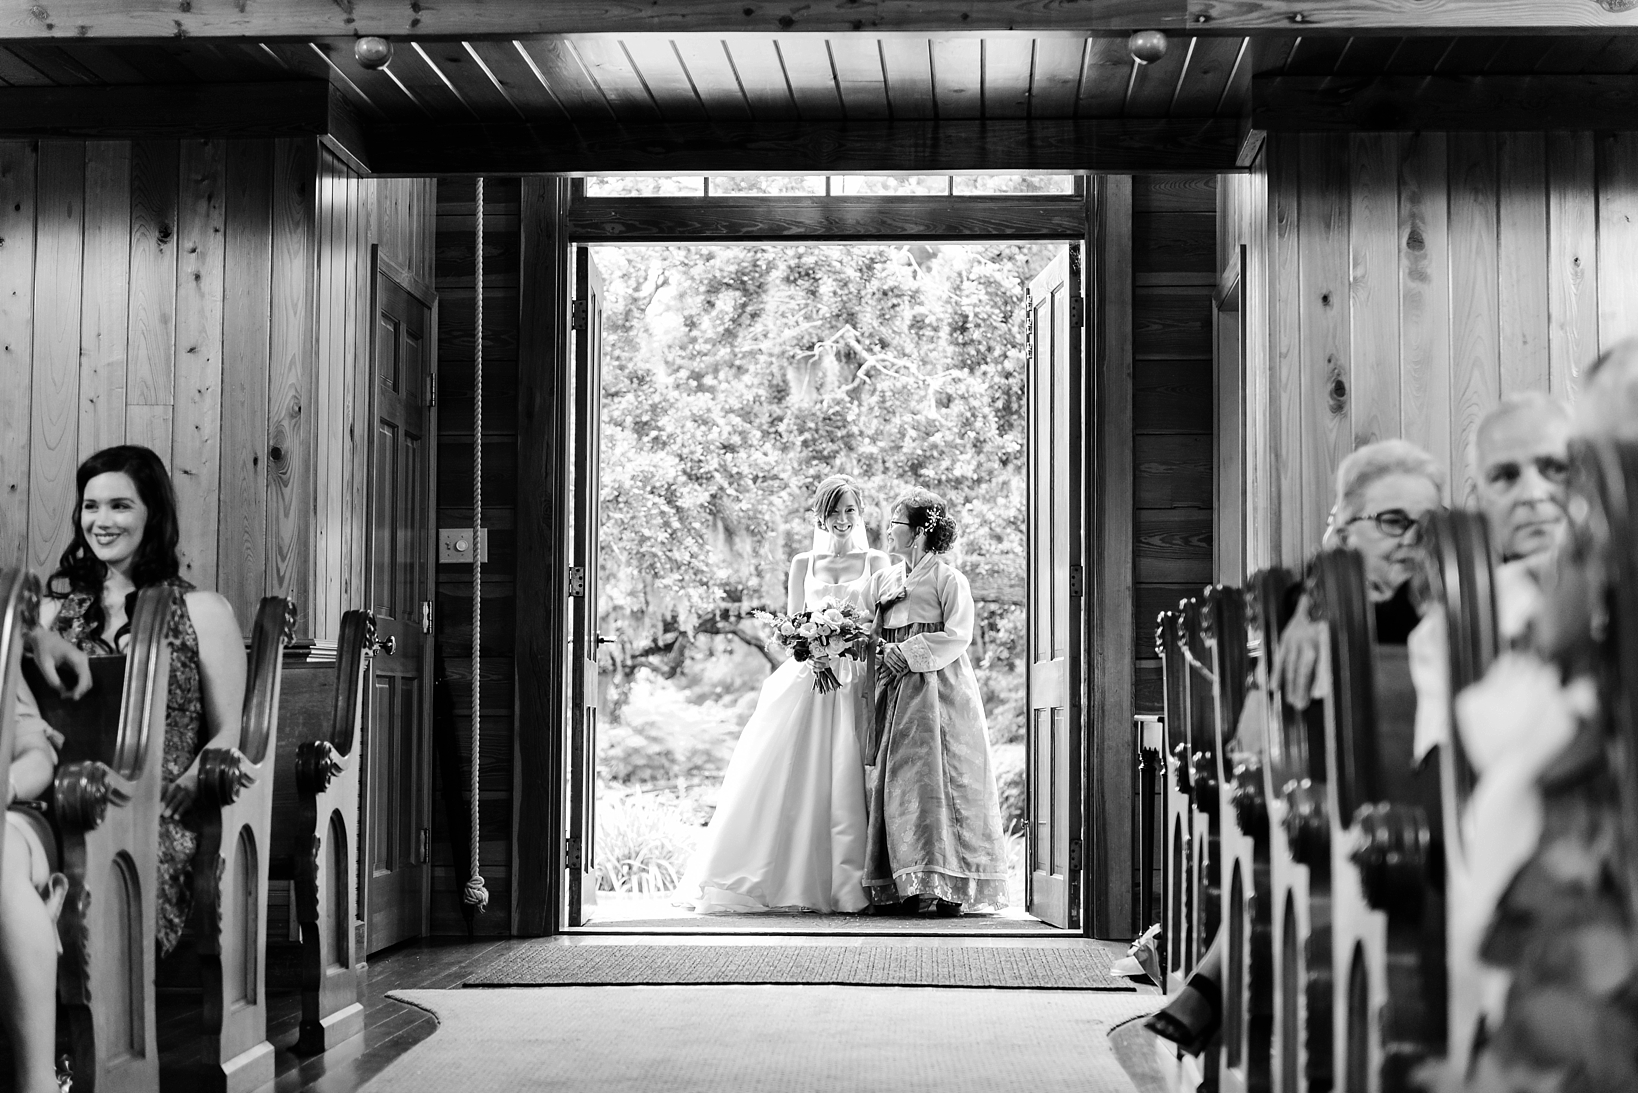 The bride enters the wedding chapel with her mom in black and white by Sarah & Ben Photography